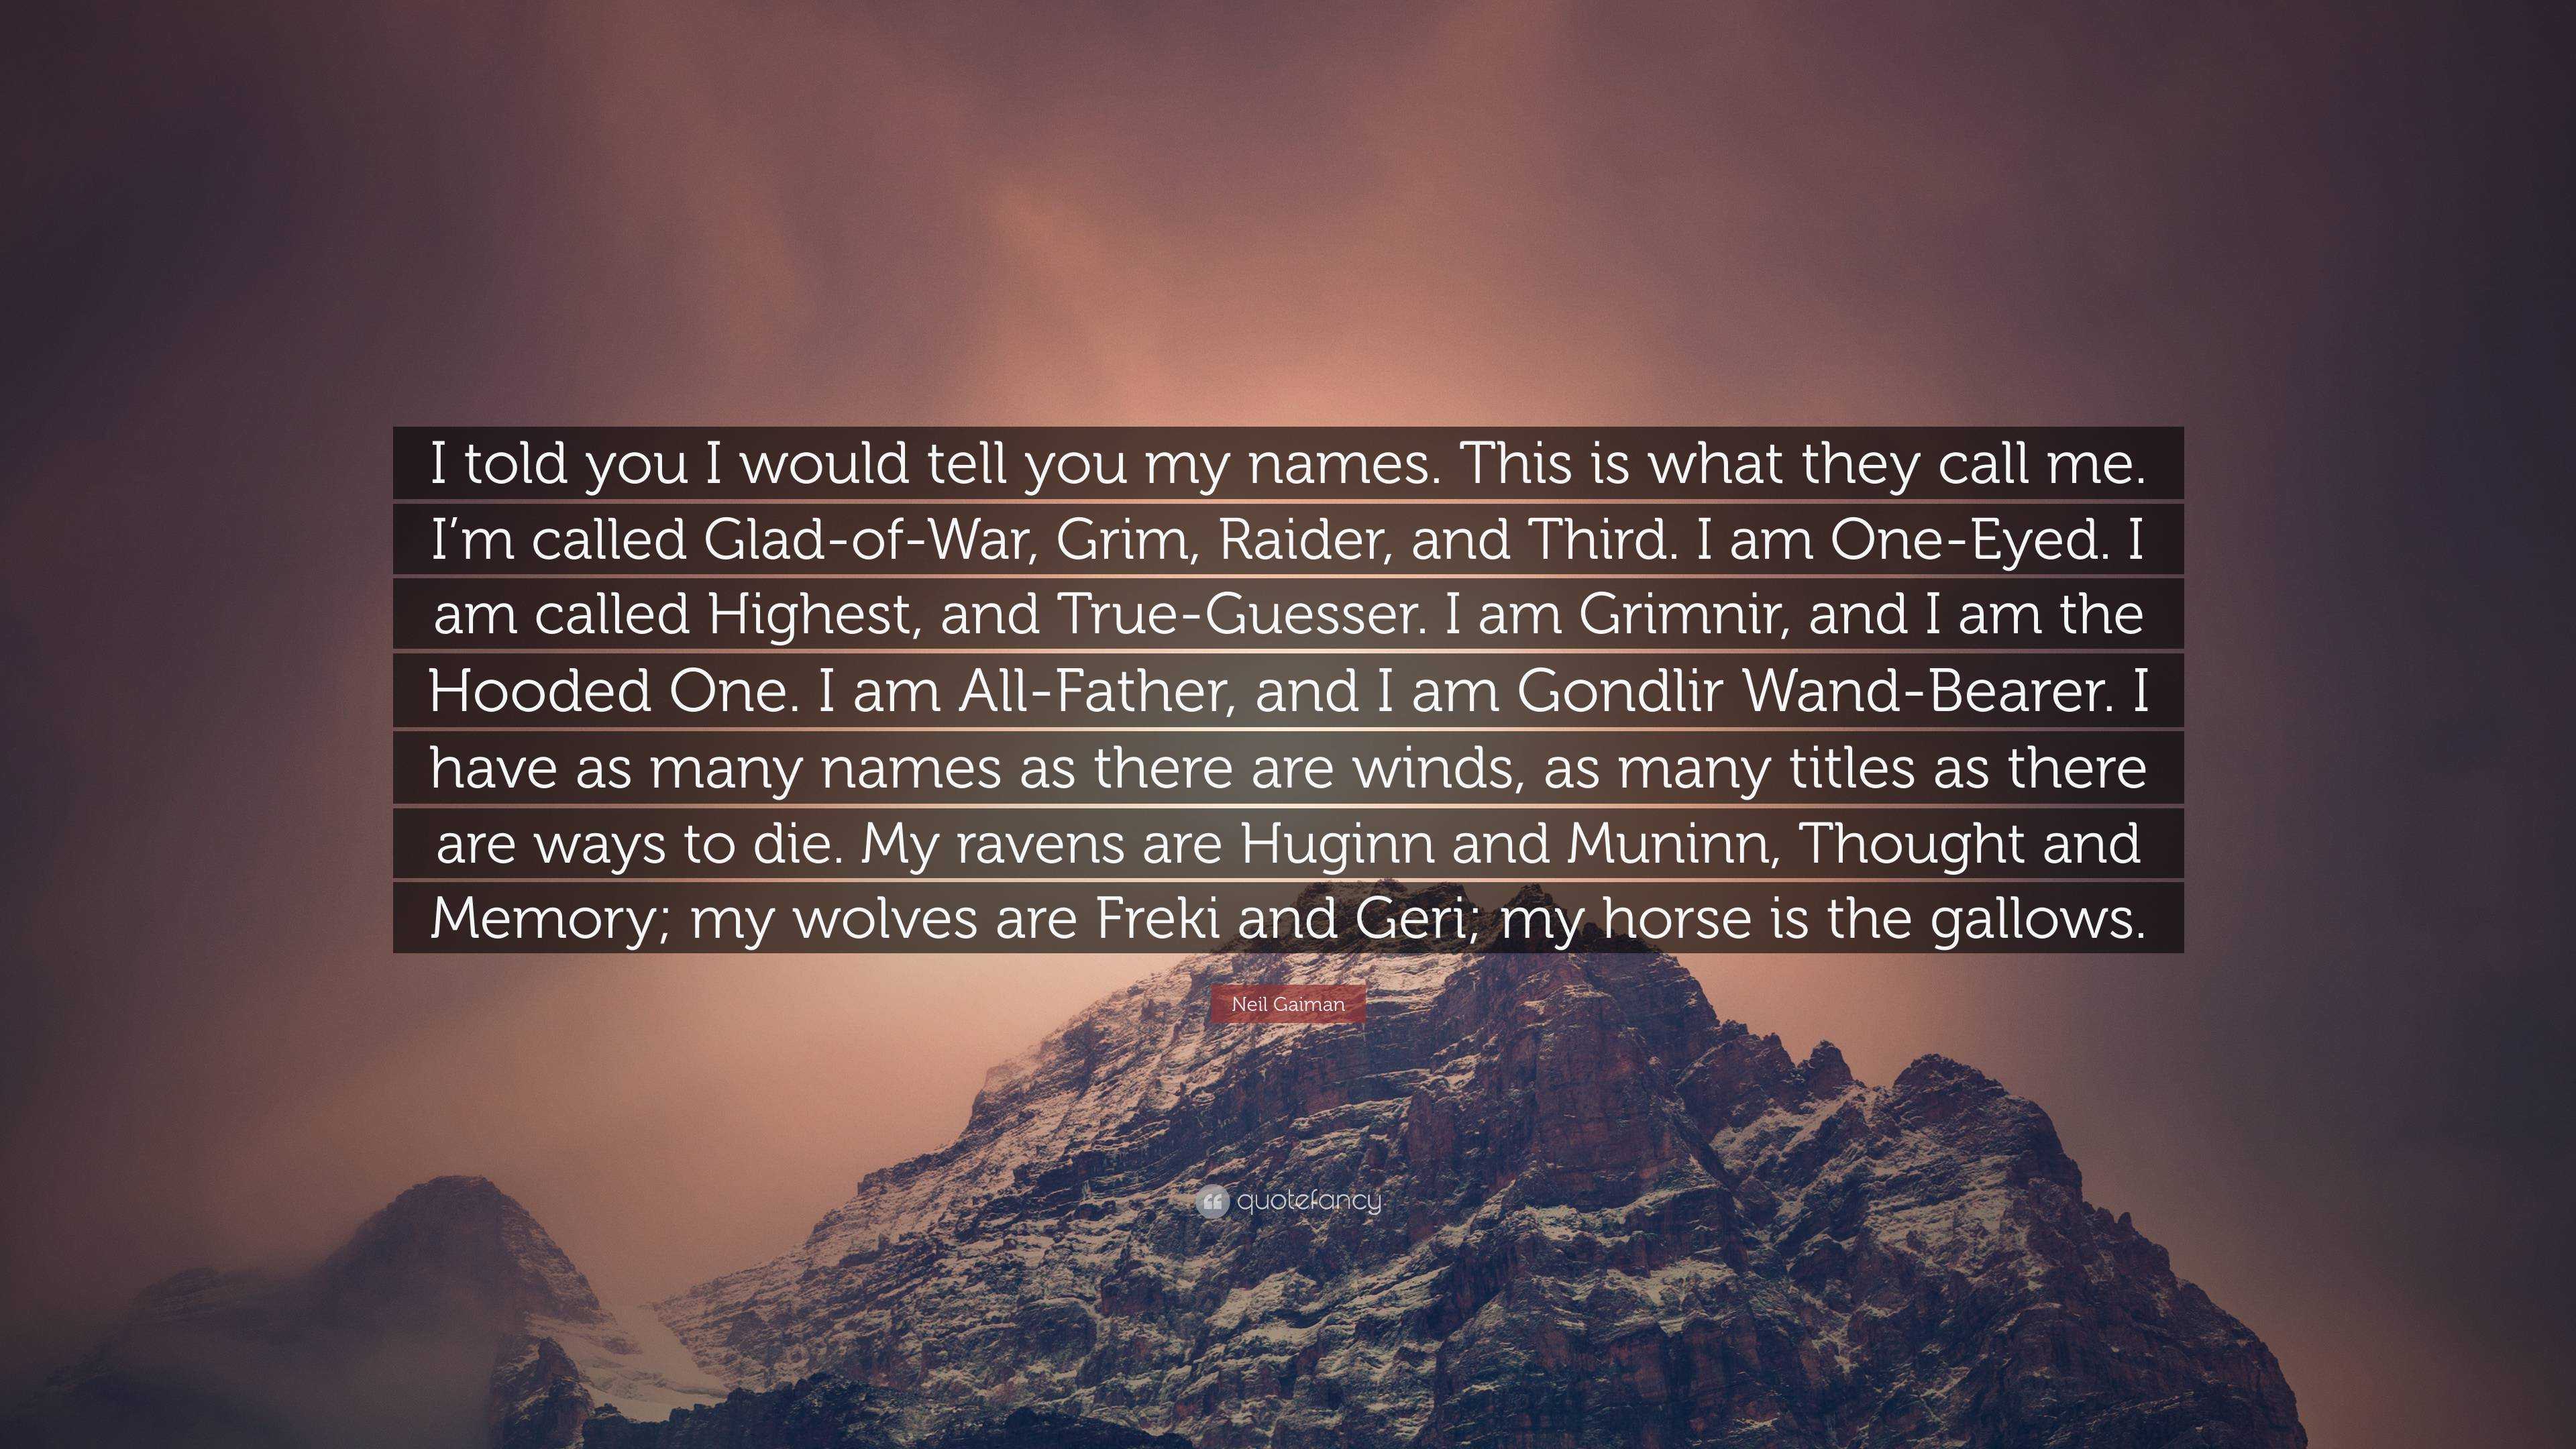 Neil Gaiman Quote: “I told you I would tell you names. This is they call me. I'm called Glad-of-War, Grim, Raider, and Third. I am O...”